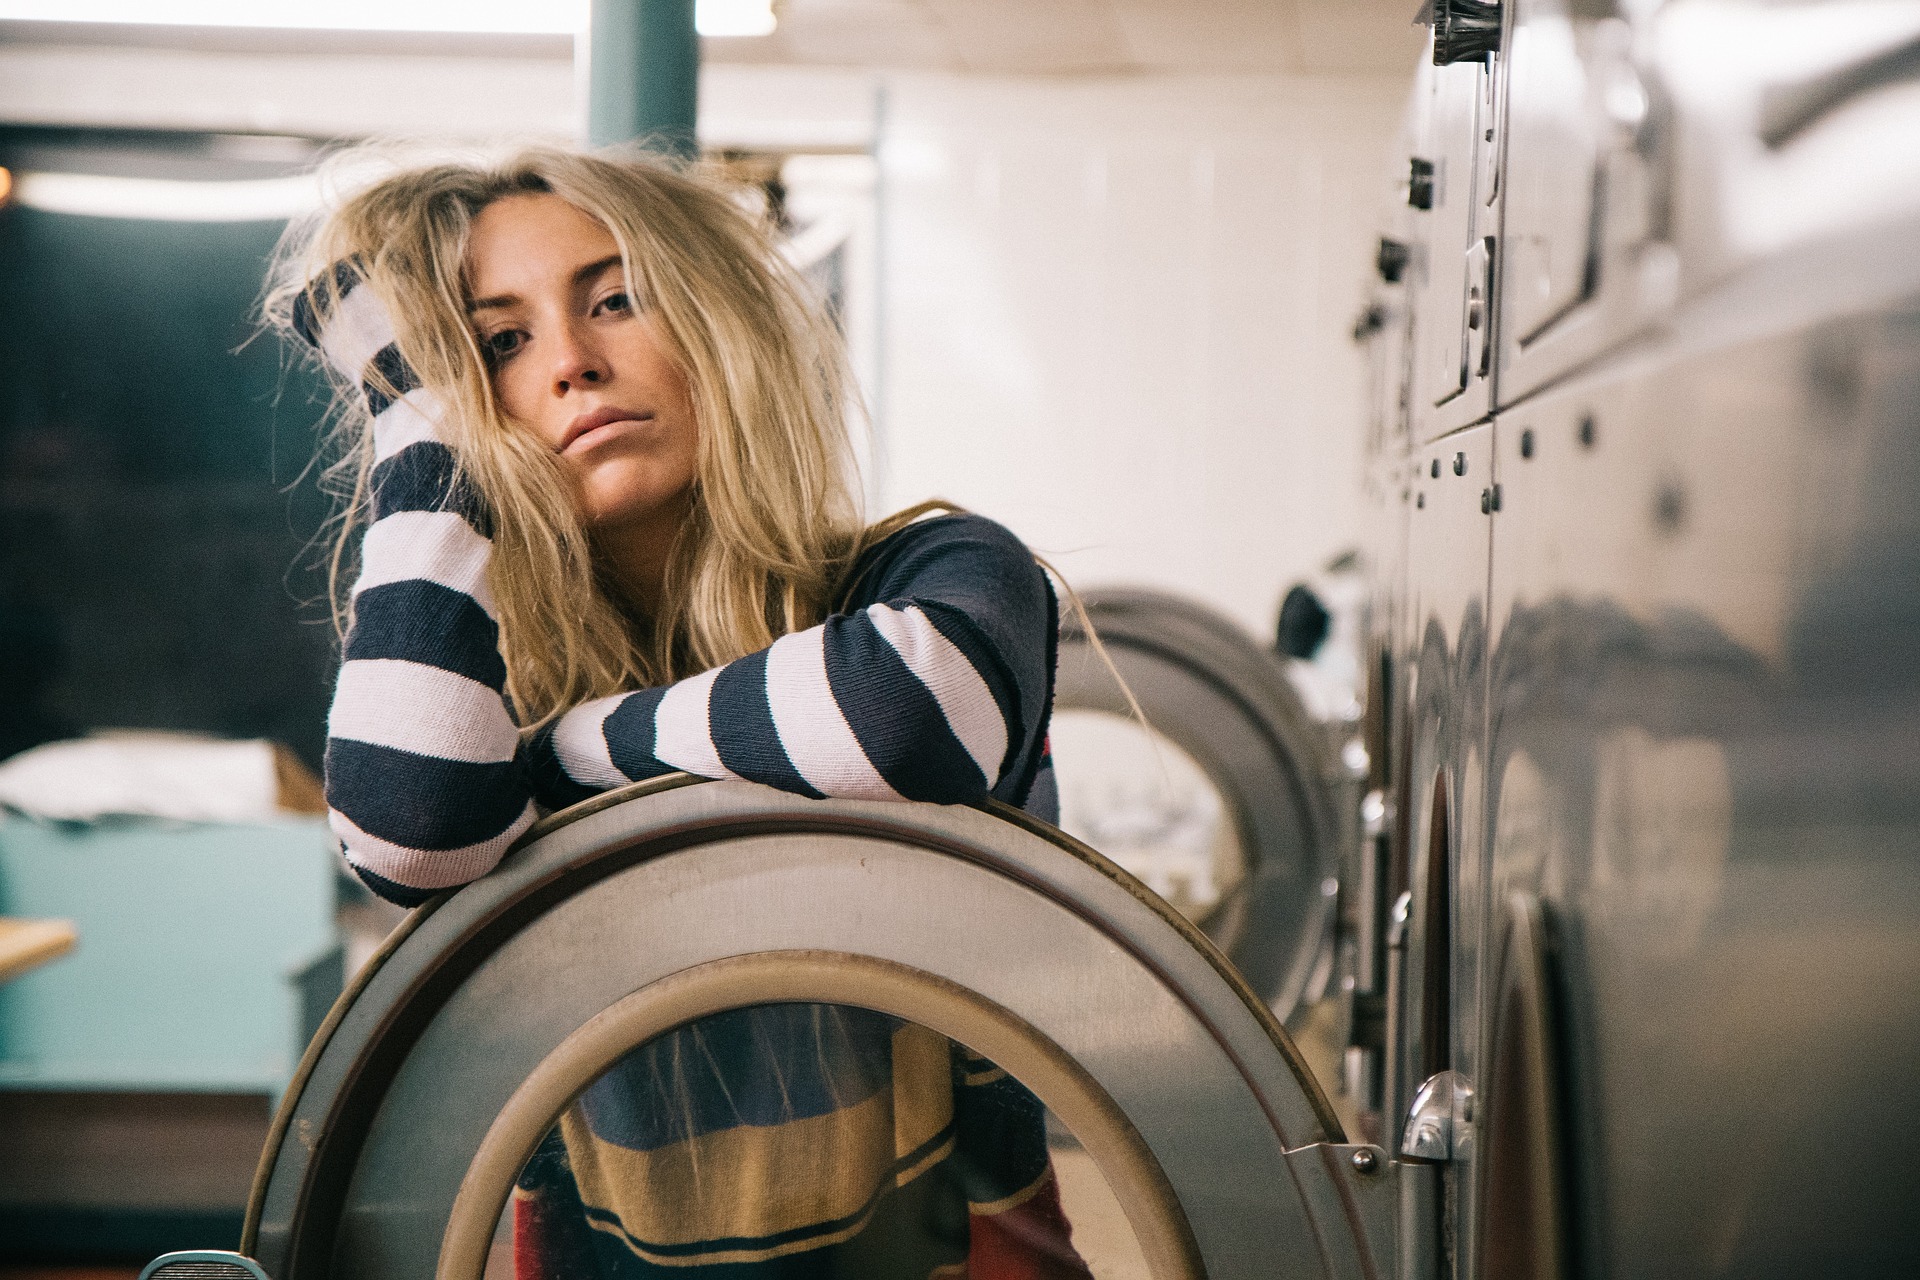 Girl at laundry mat looking tired